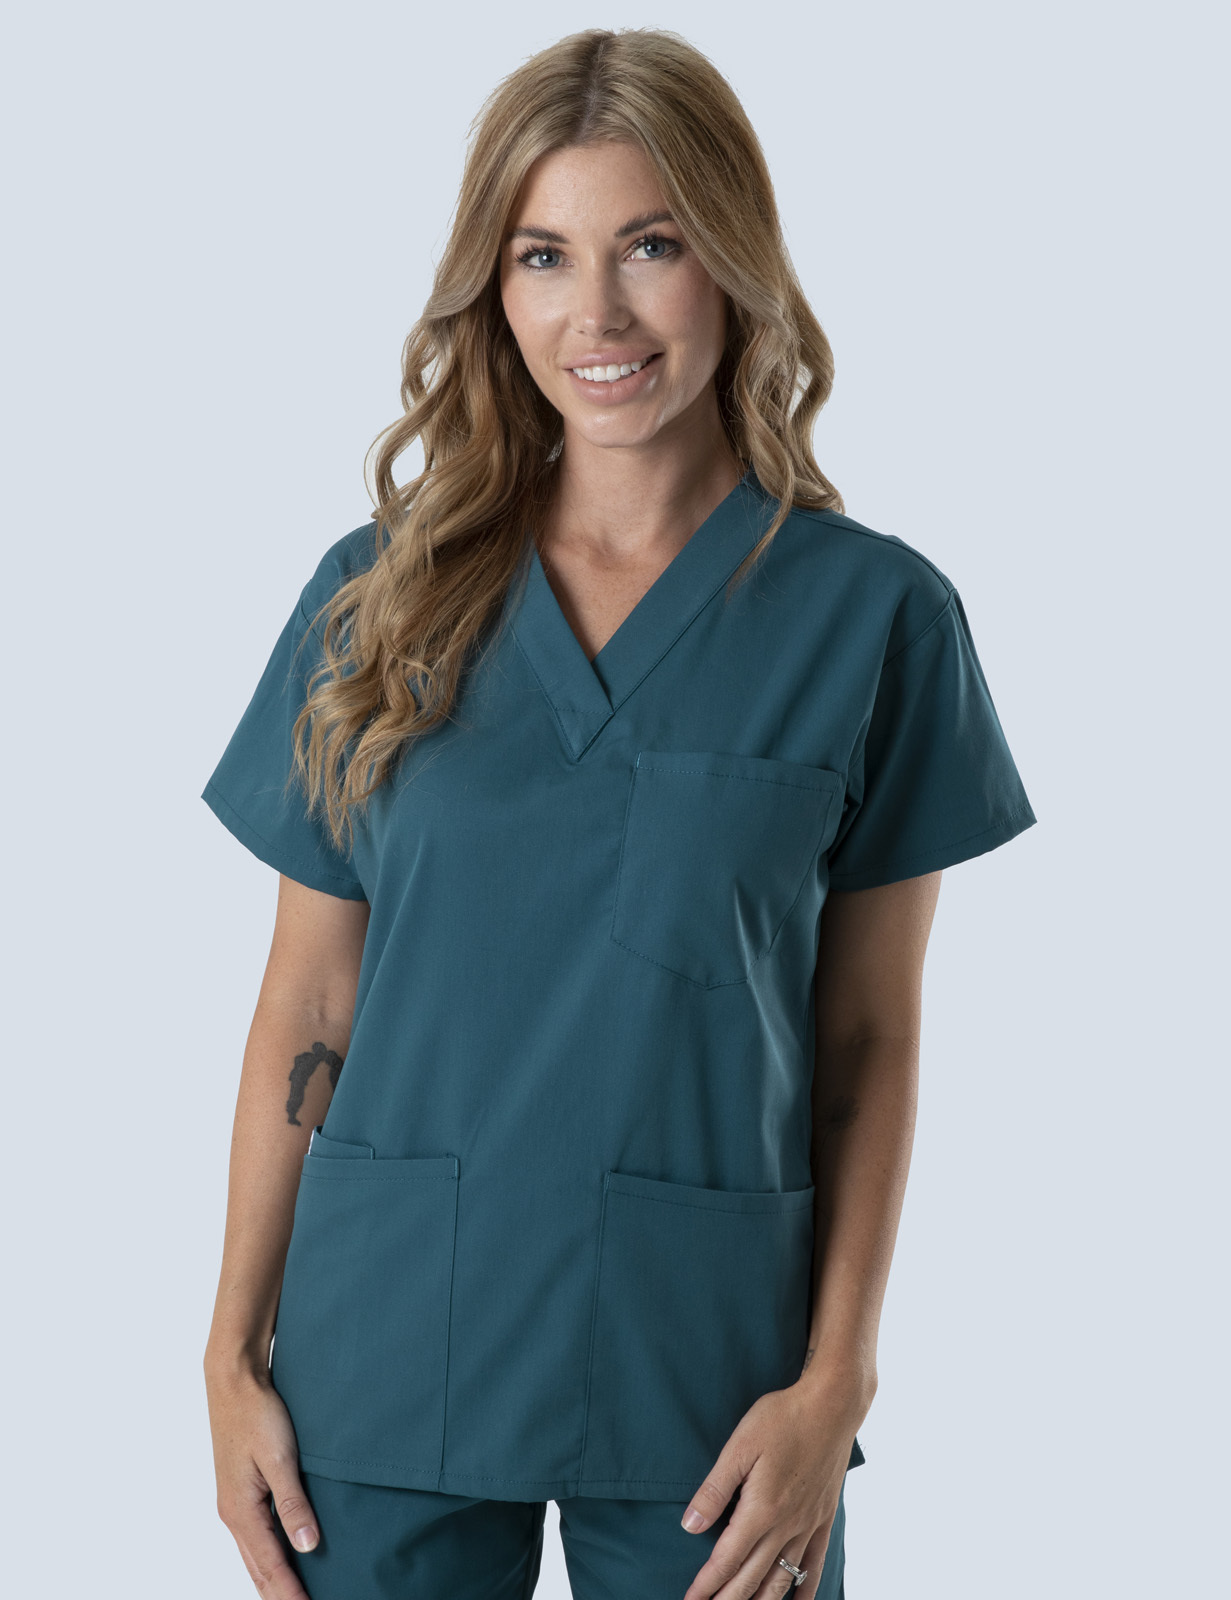 Canberra Hospital - Physiotherapist (4 Pocket Scrub Top and Cargo Pants in Caribbean incl Logos)